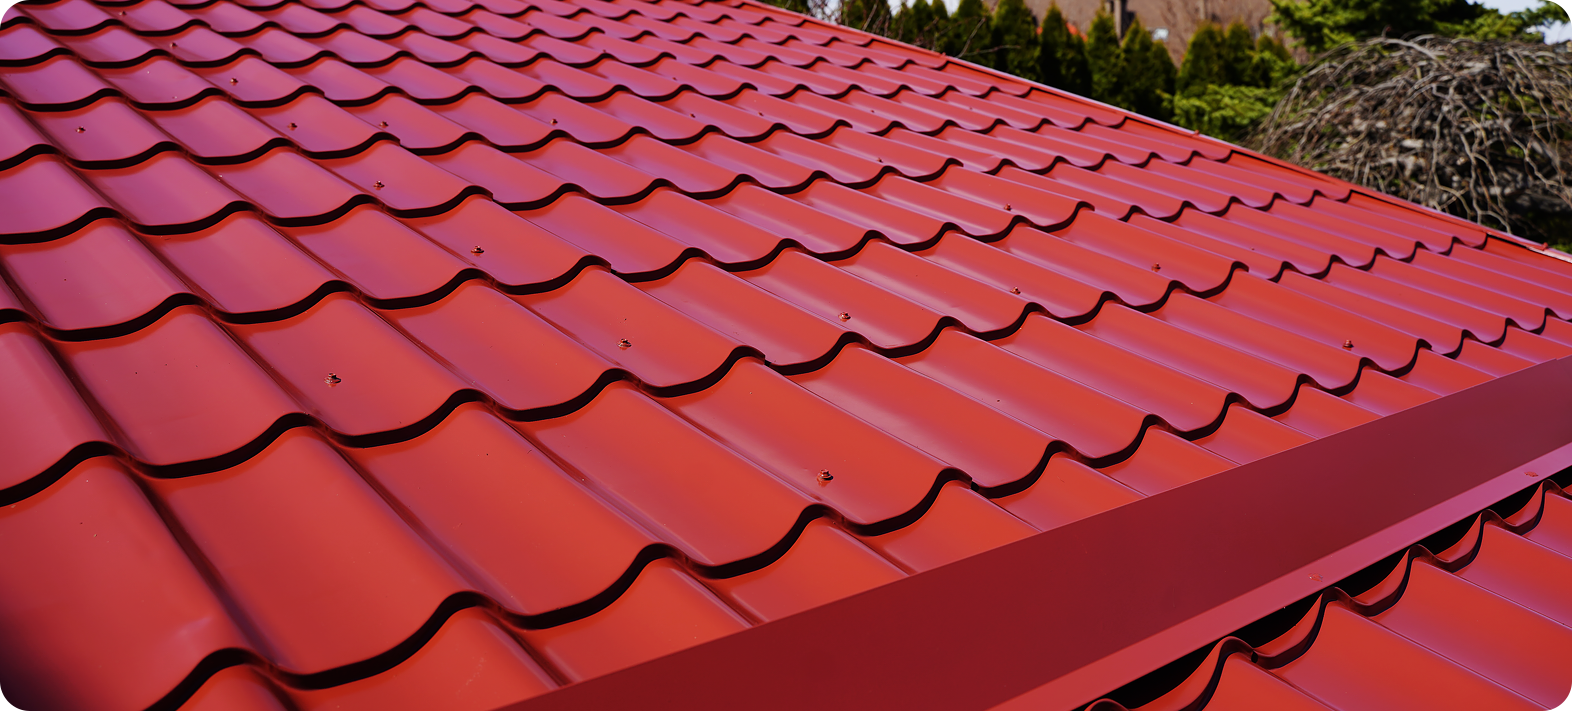 You are currently viewing What are the advantages and disadvantages of tile roofing?